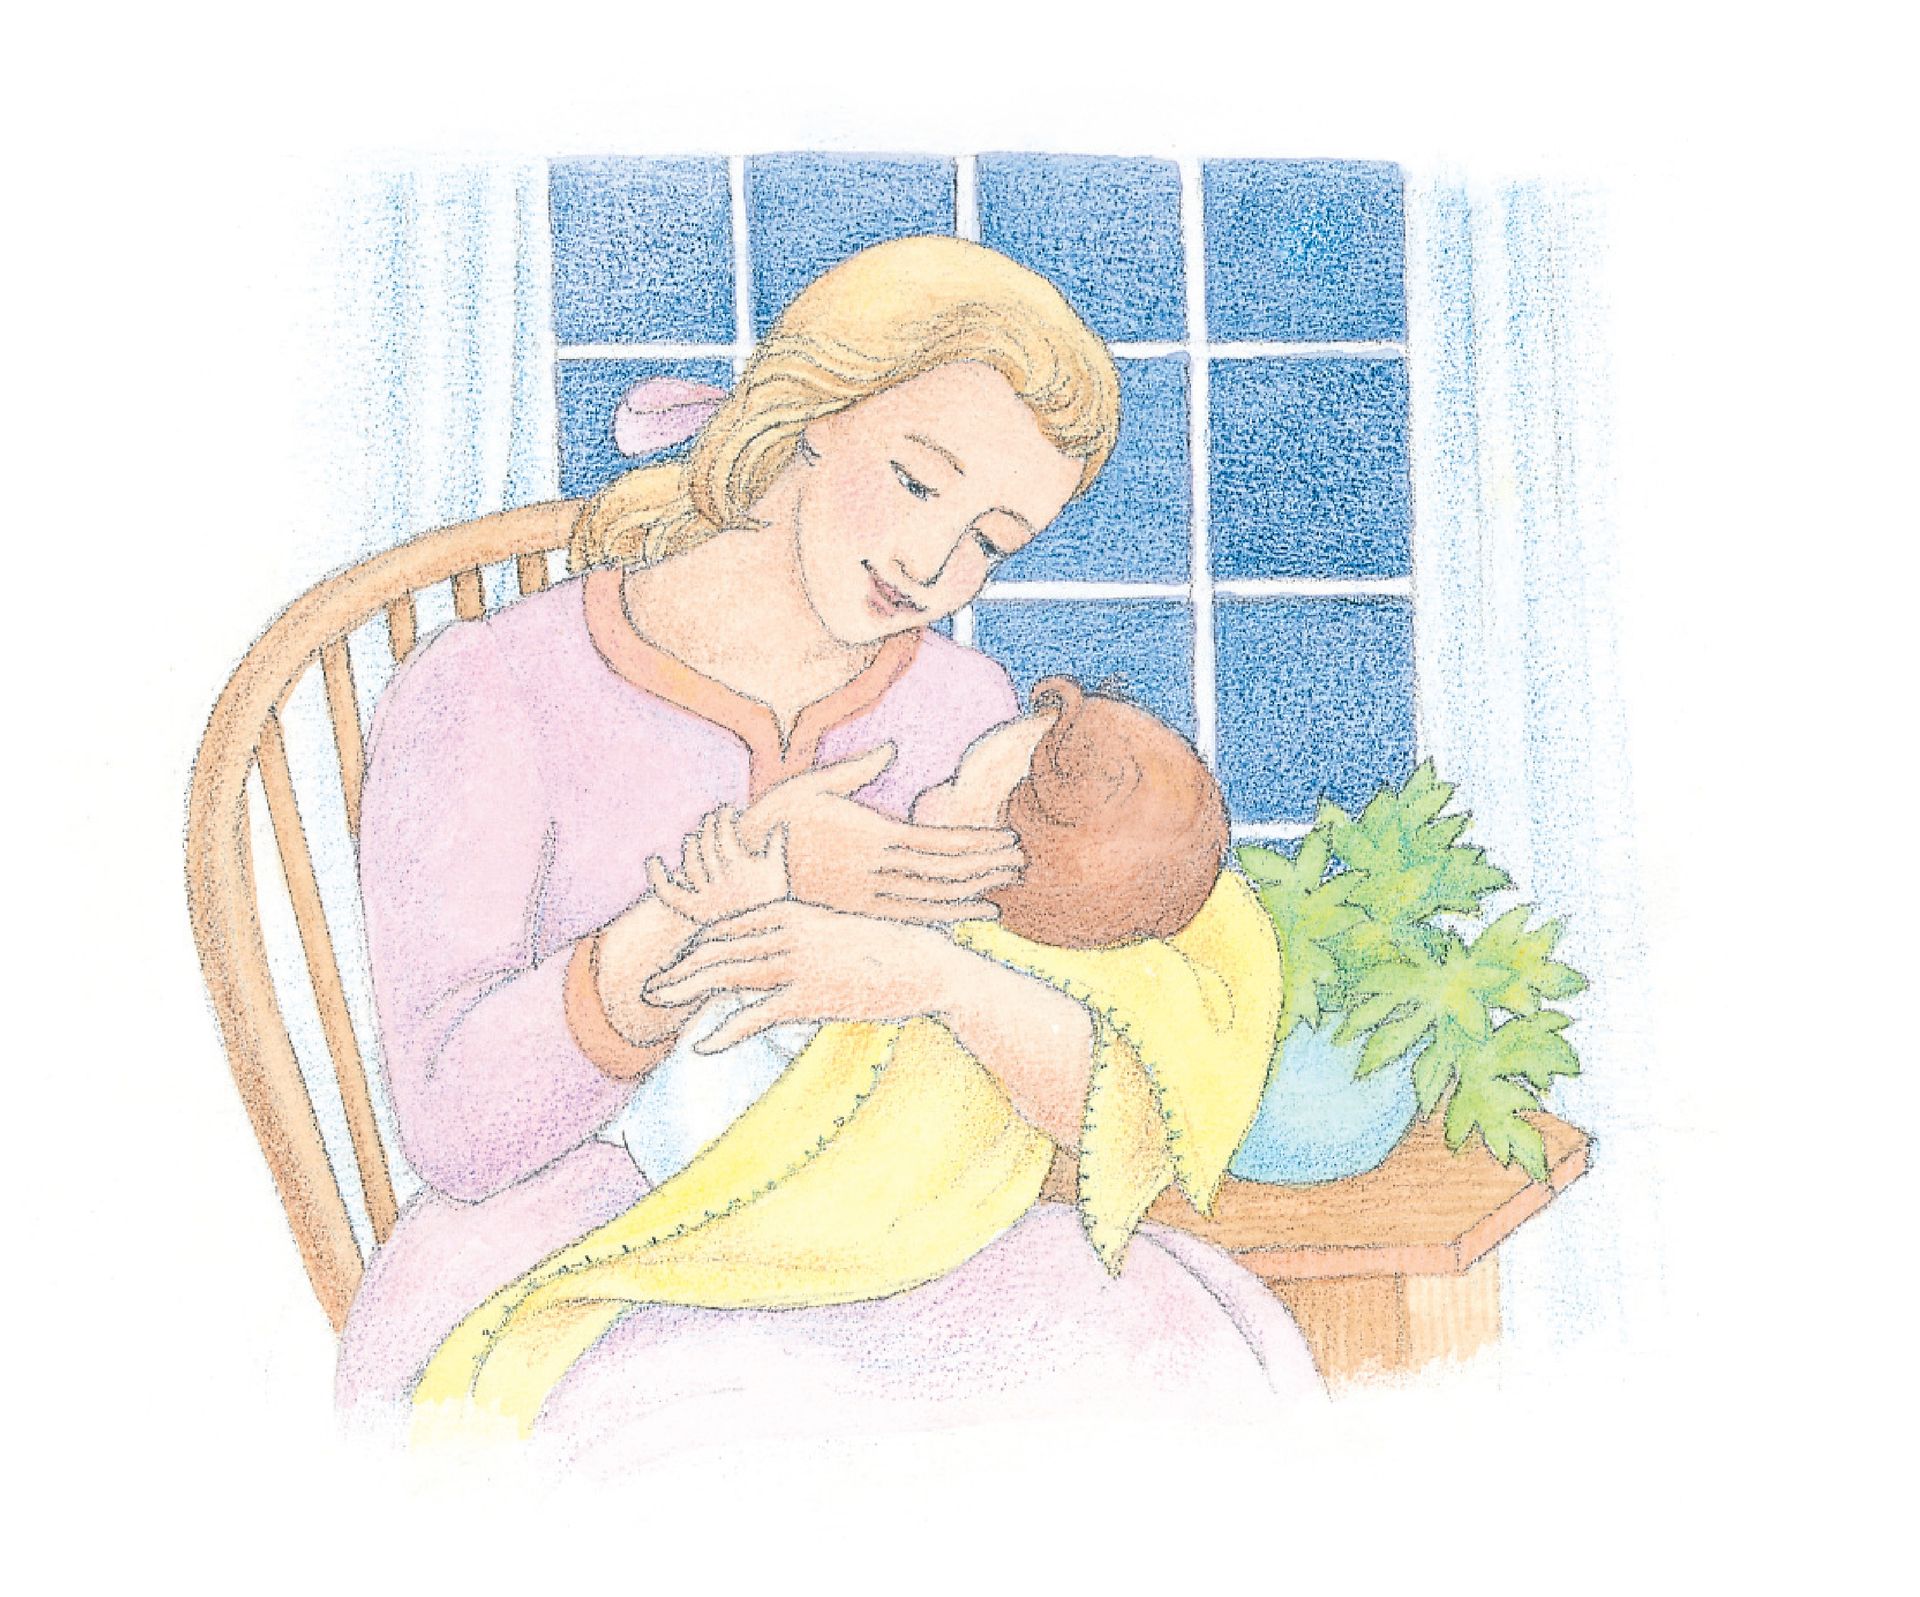 A mother holding and interacting with her baby. From the Children’s Songbook, page 48, “Oh, Hush Thee, My Baby”; watercolor illustration by Phyllis Luch.